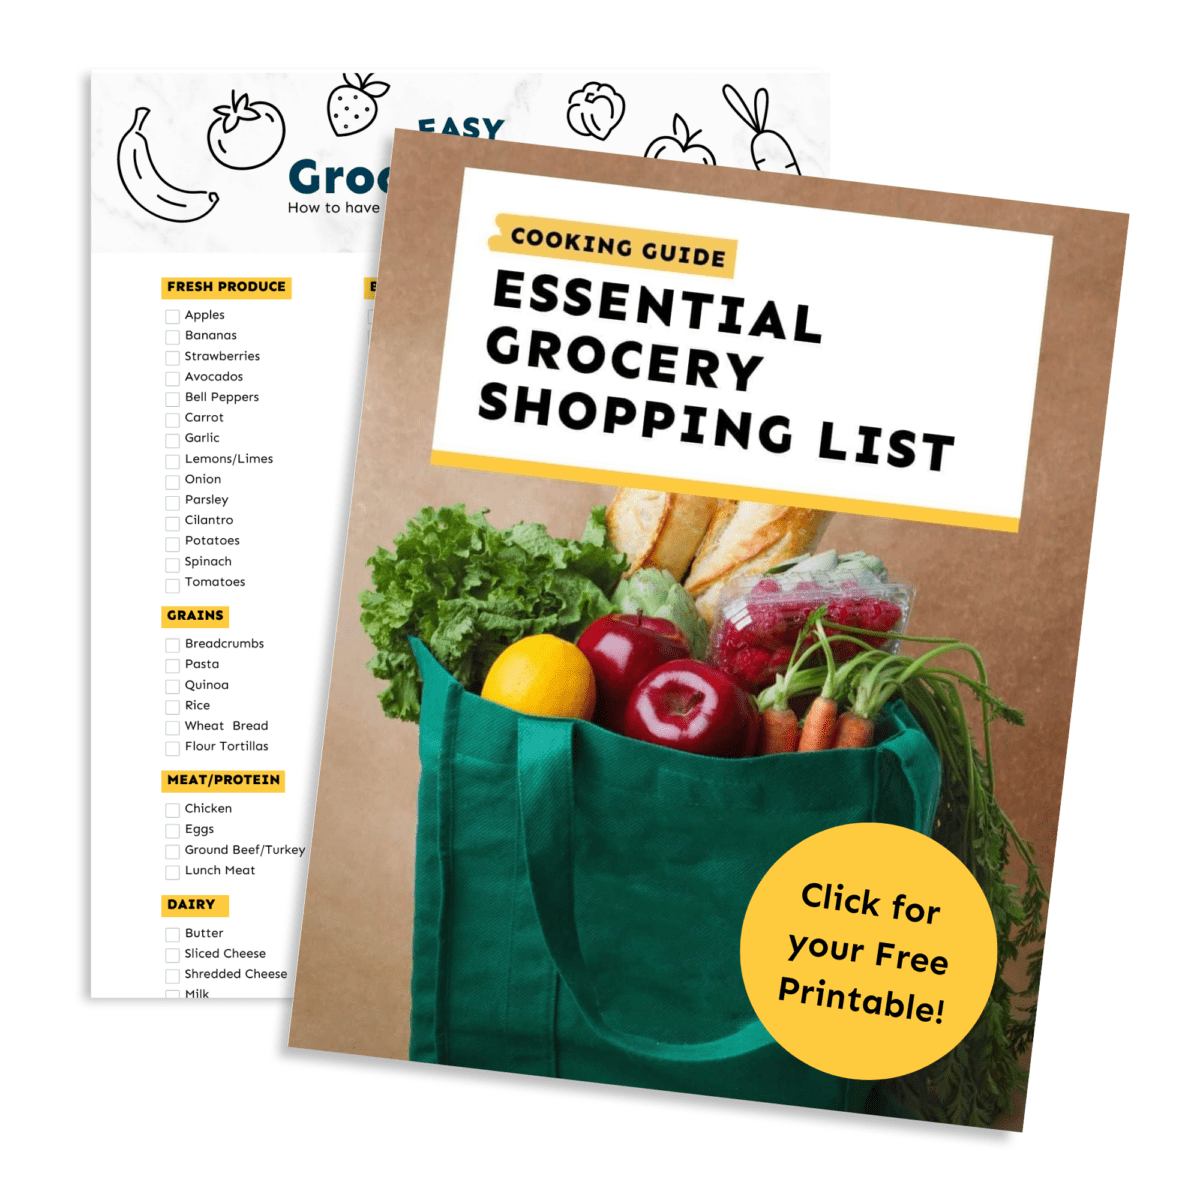 Essential Kitchen Tools for Easier Meal Preparation {Printable Checklist}